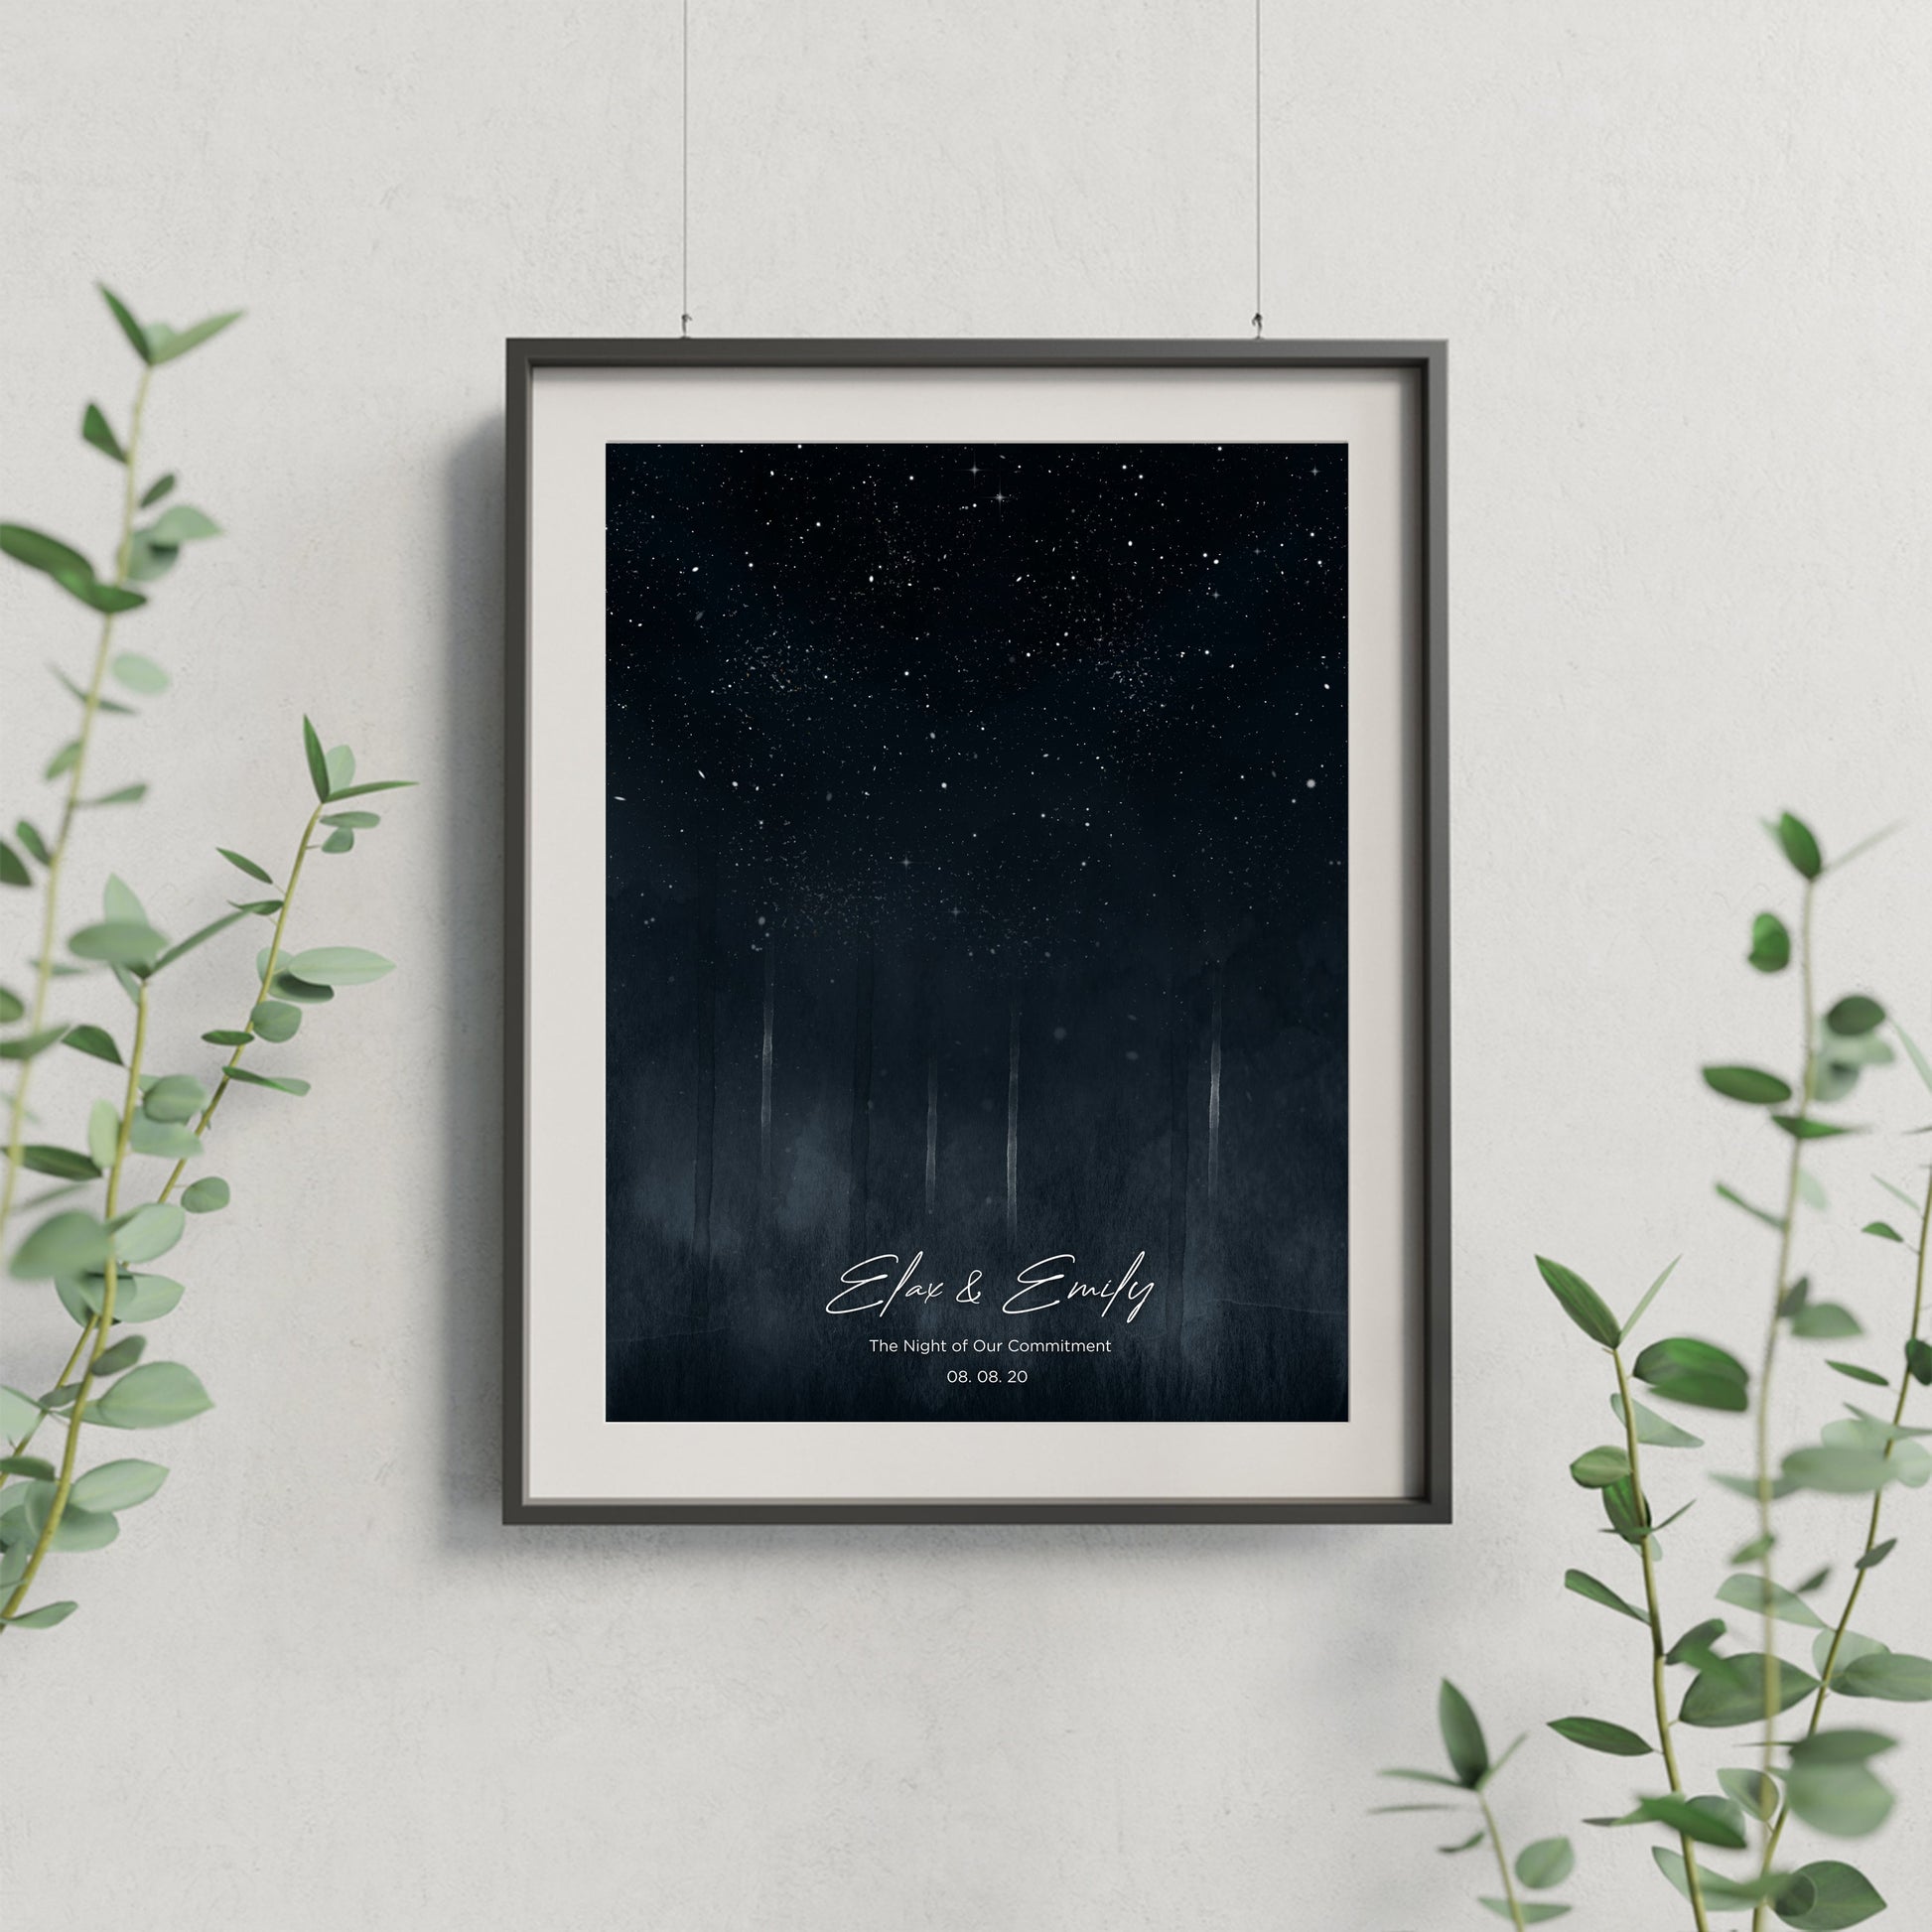 Personalized star map on canvas: Celestial snapshot, timeless gift on adorable wall.